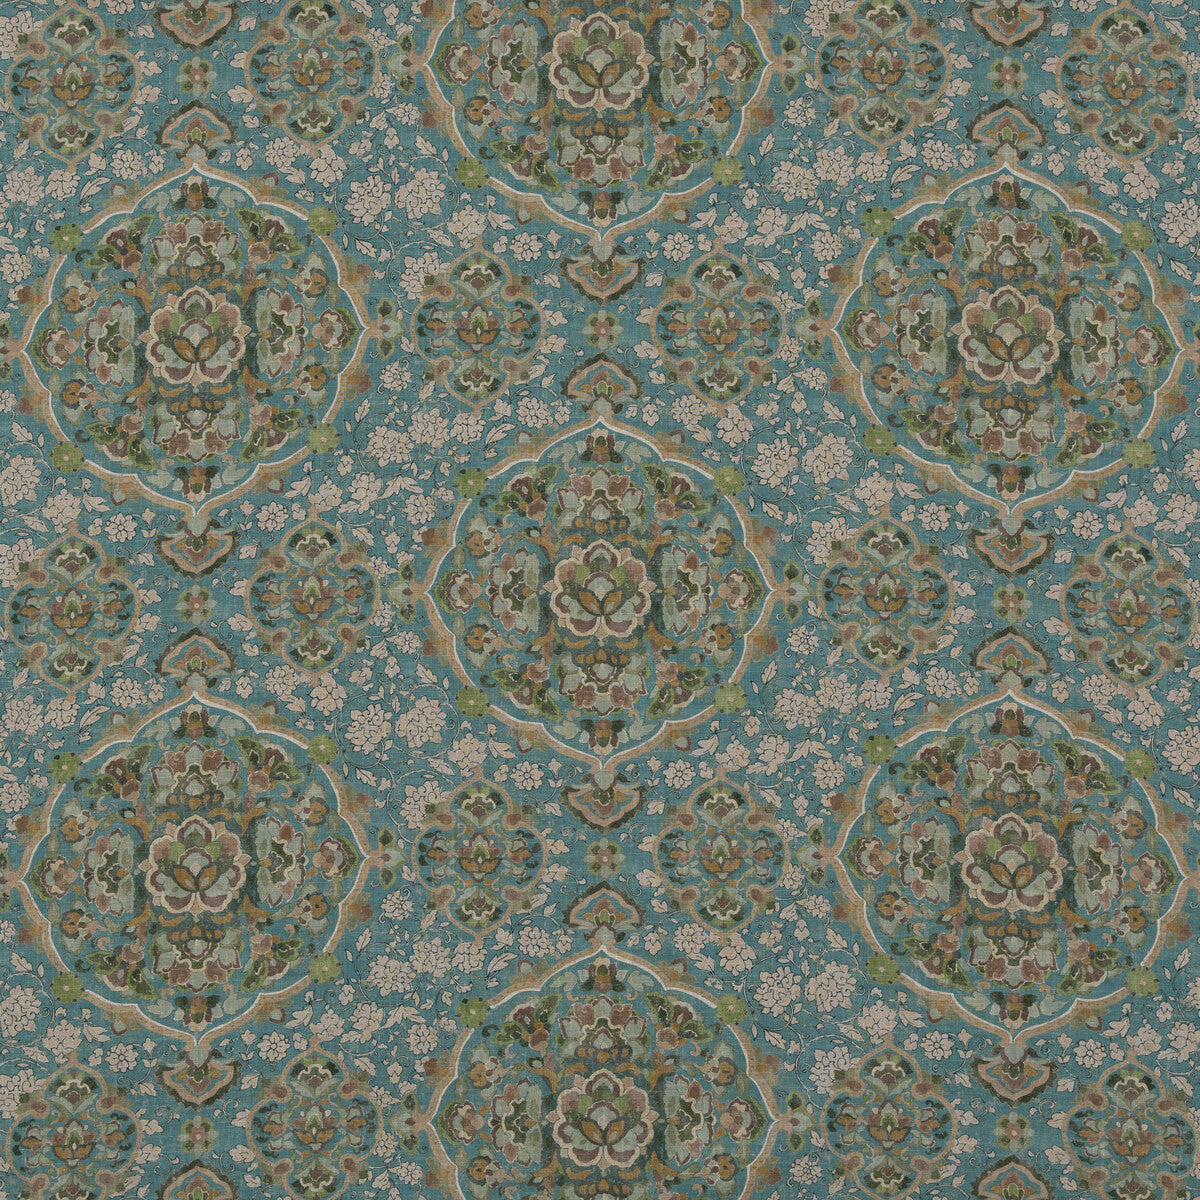 Kiana fabric in teal color - pattern BP10928.2.0 - by G P &amp; J Baker in the Caspian collection